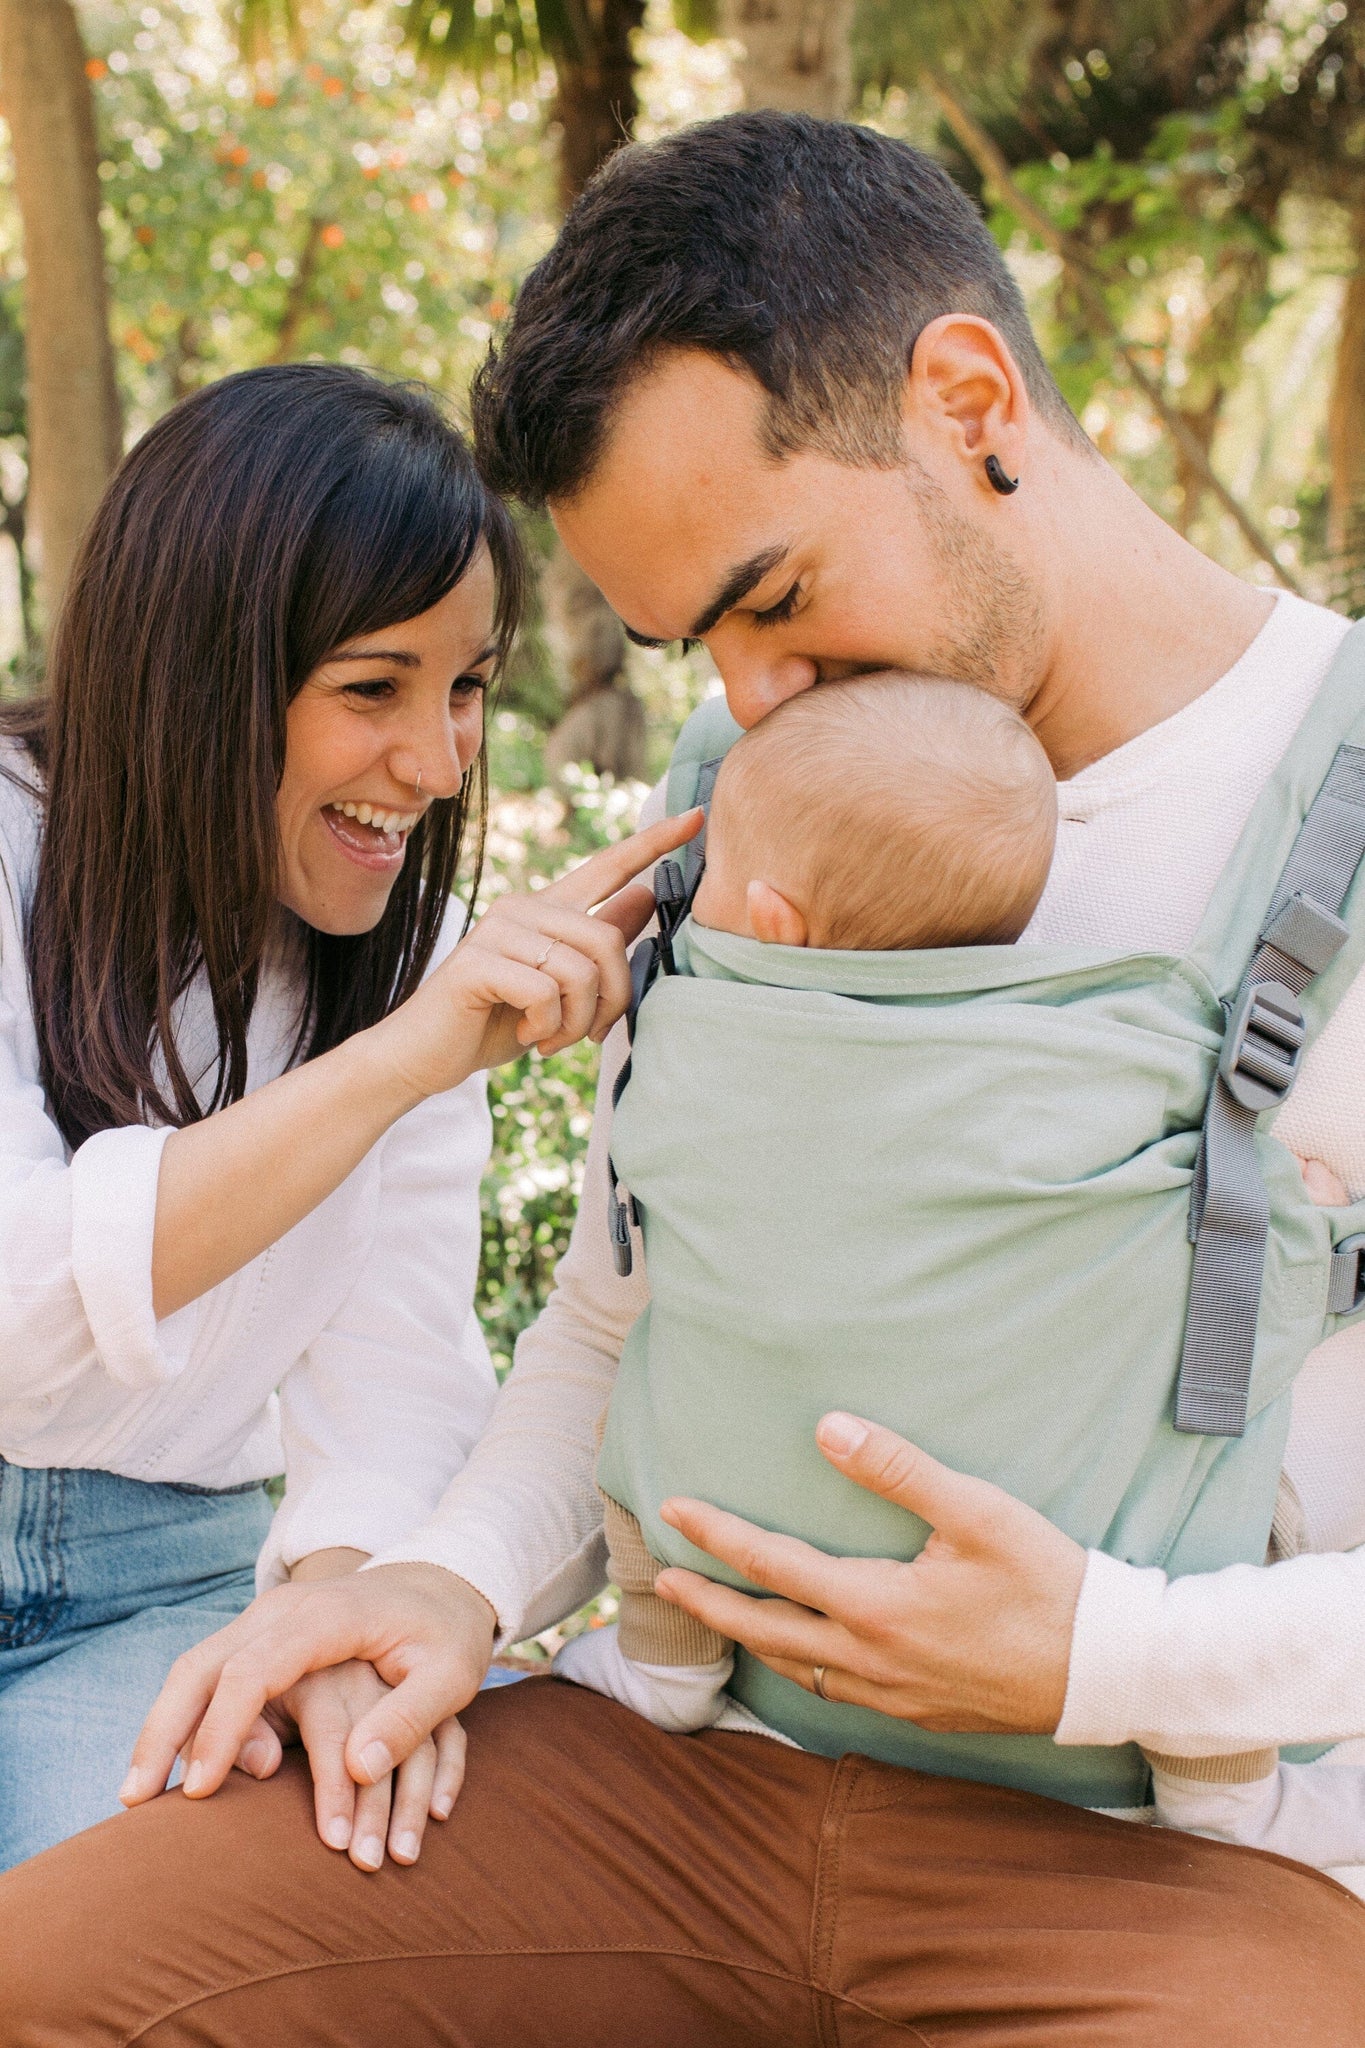 With an intuitive design that regulates in width and height, the Boba X Baby Carrier is a versatile and fully adjustable carrier that will truly grow with your baby.